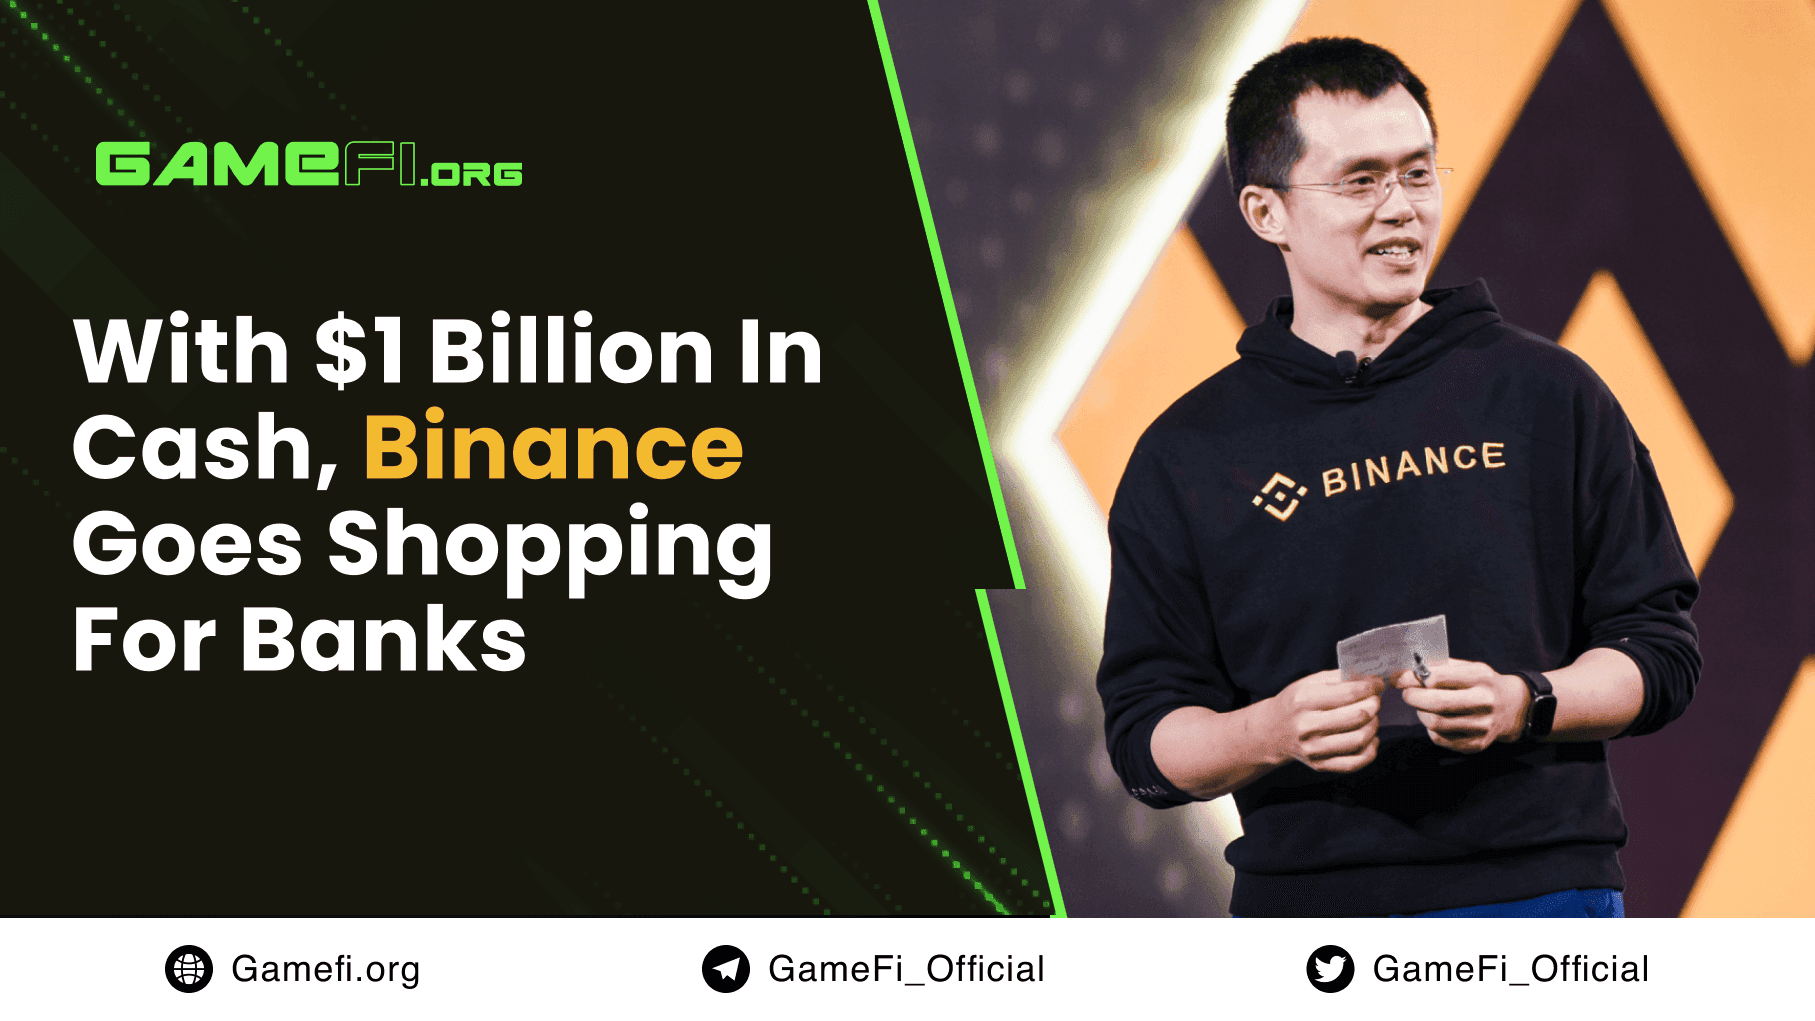 With $1 Billion In Cash, Binance Goes Shopping For Banks